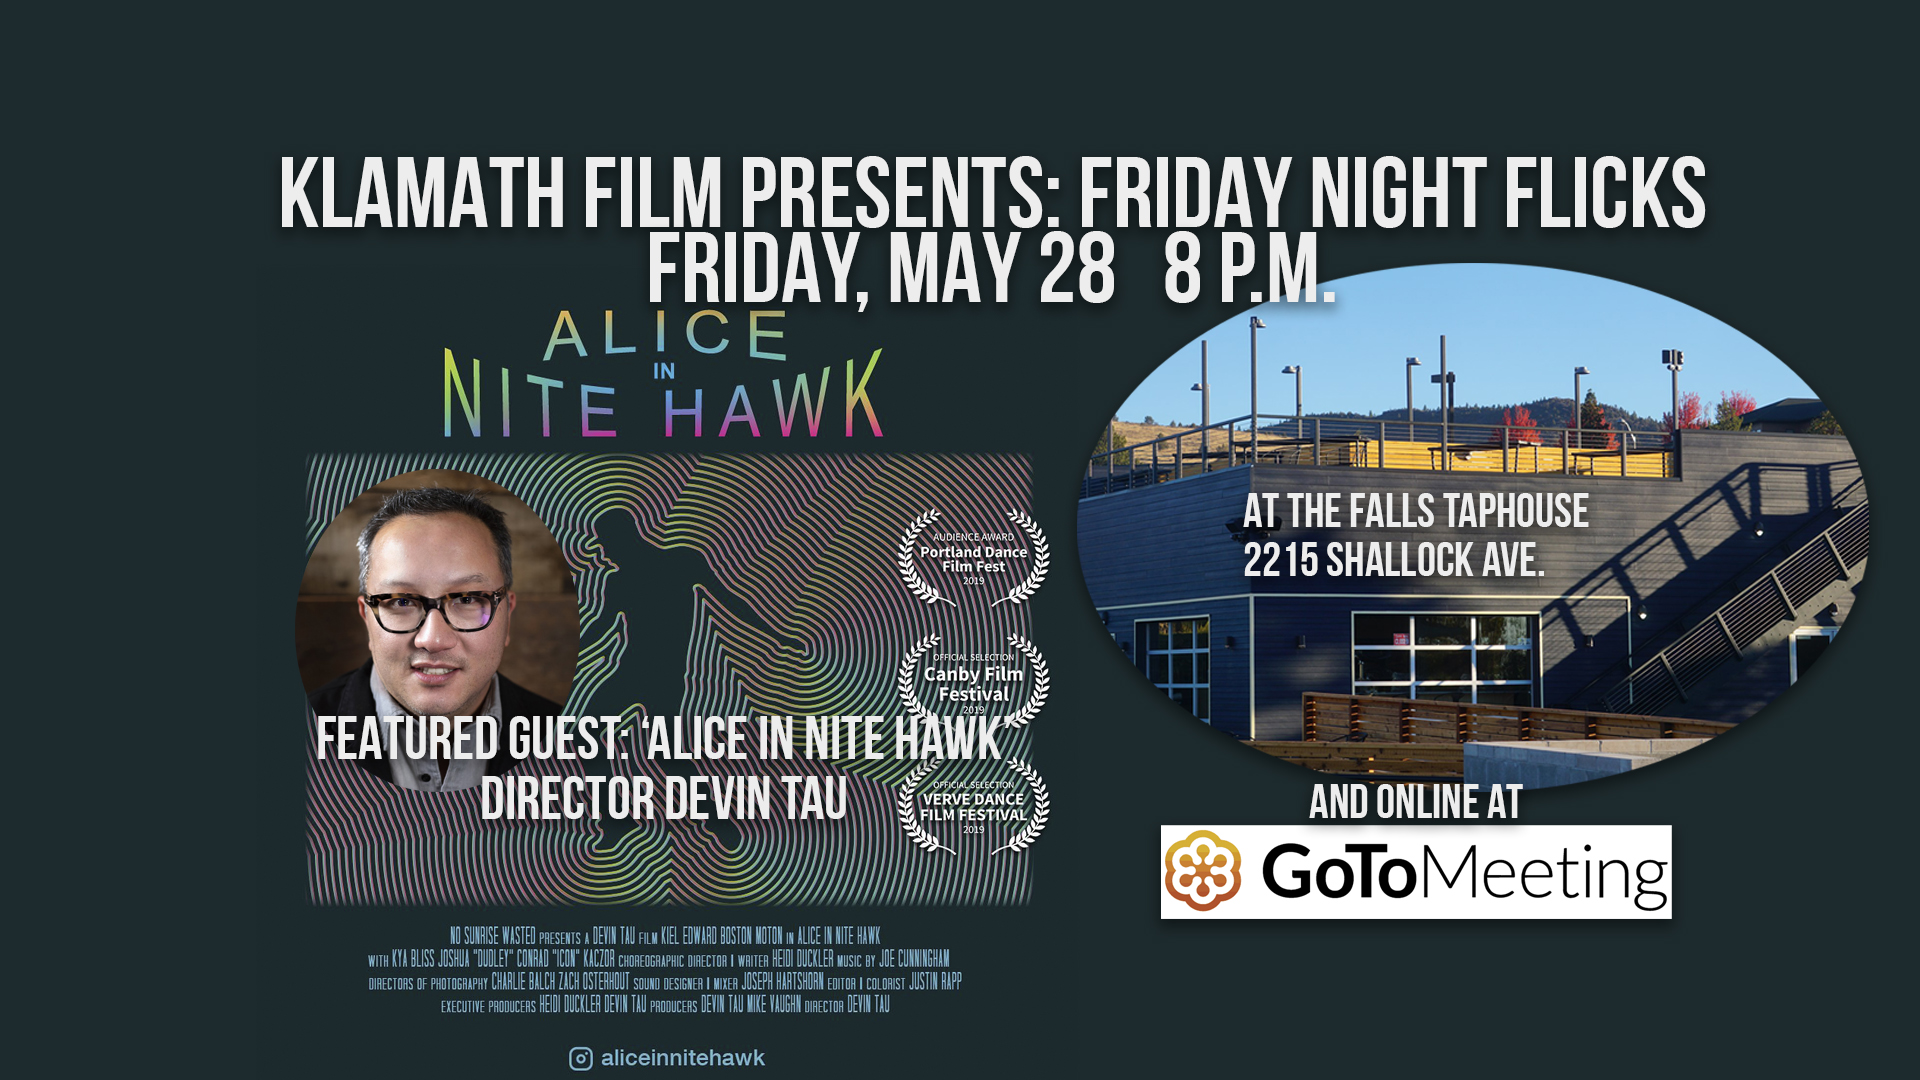 ‘Alice in Nite Hawk’ film screening and Q&A at Falls Taphouse May 28